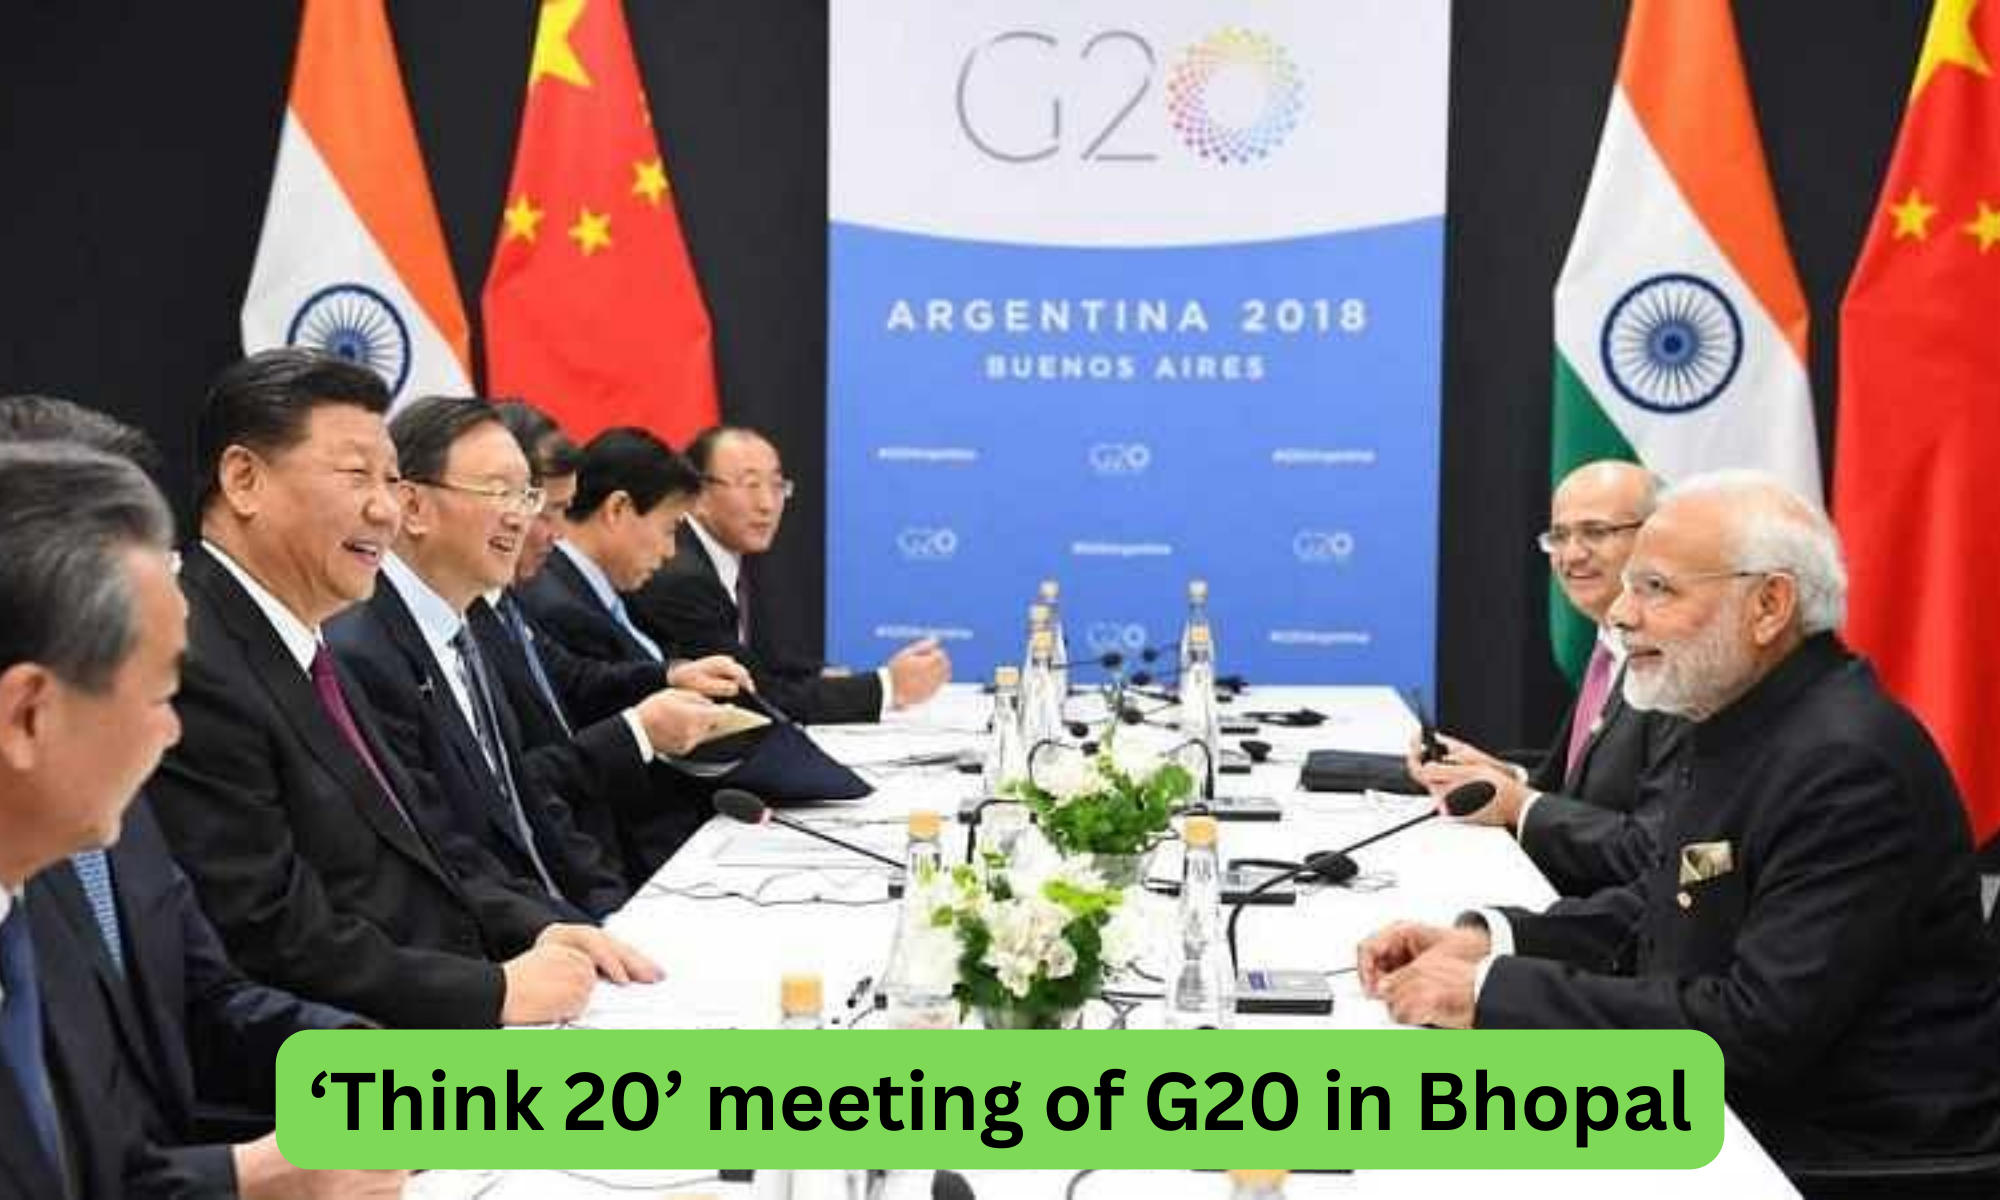 ‘Think 20’ meeting of G20 in Bhopal